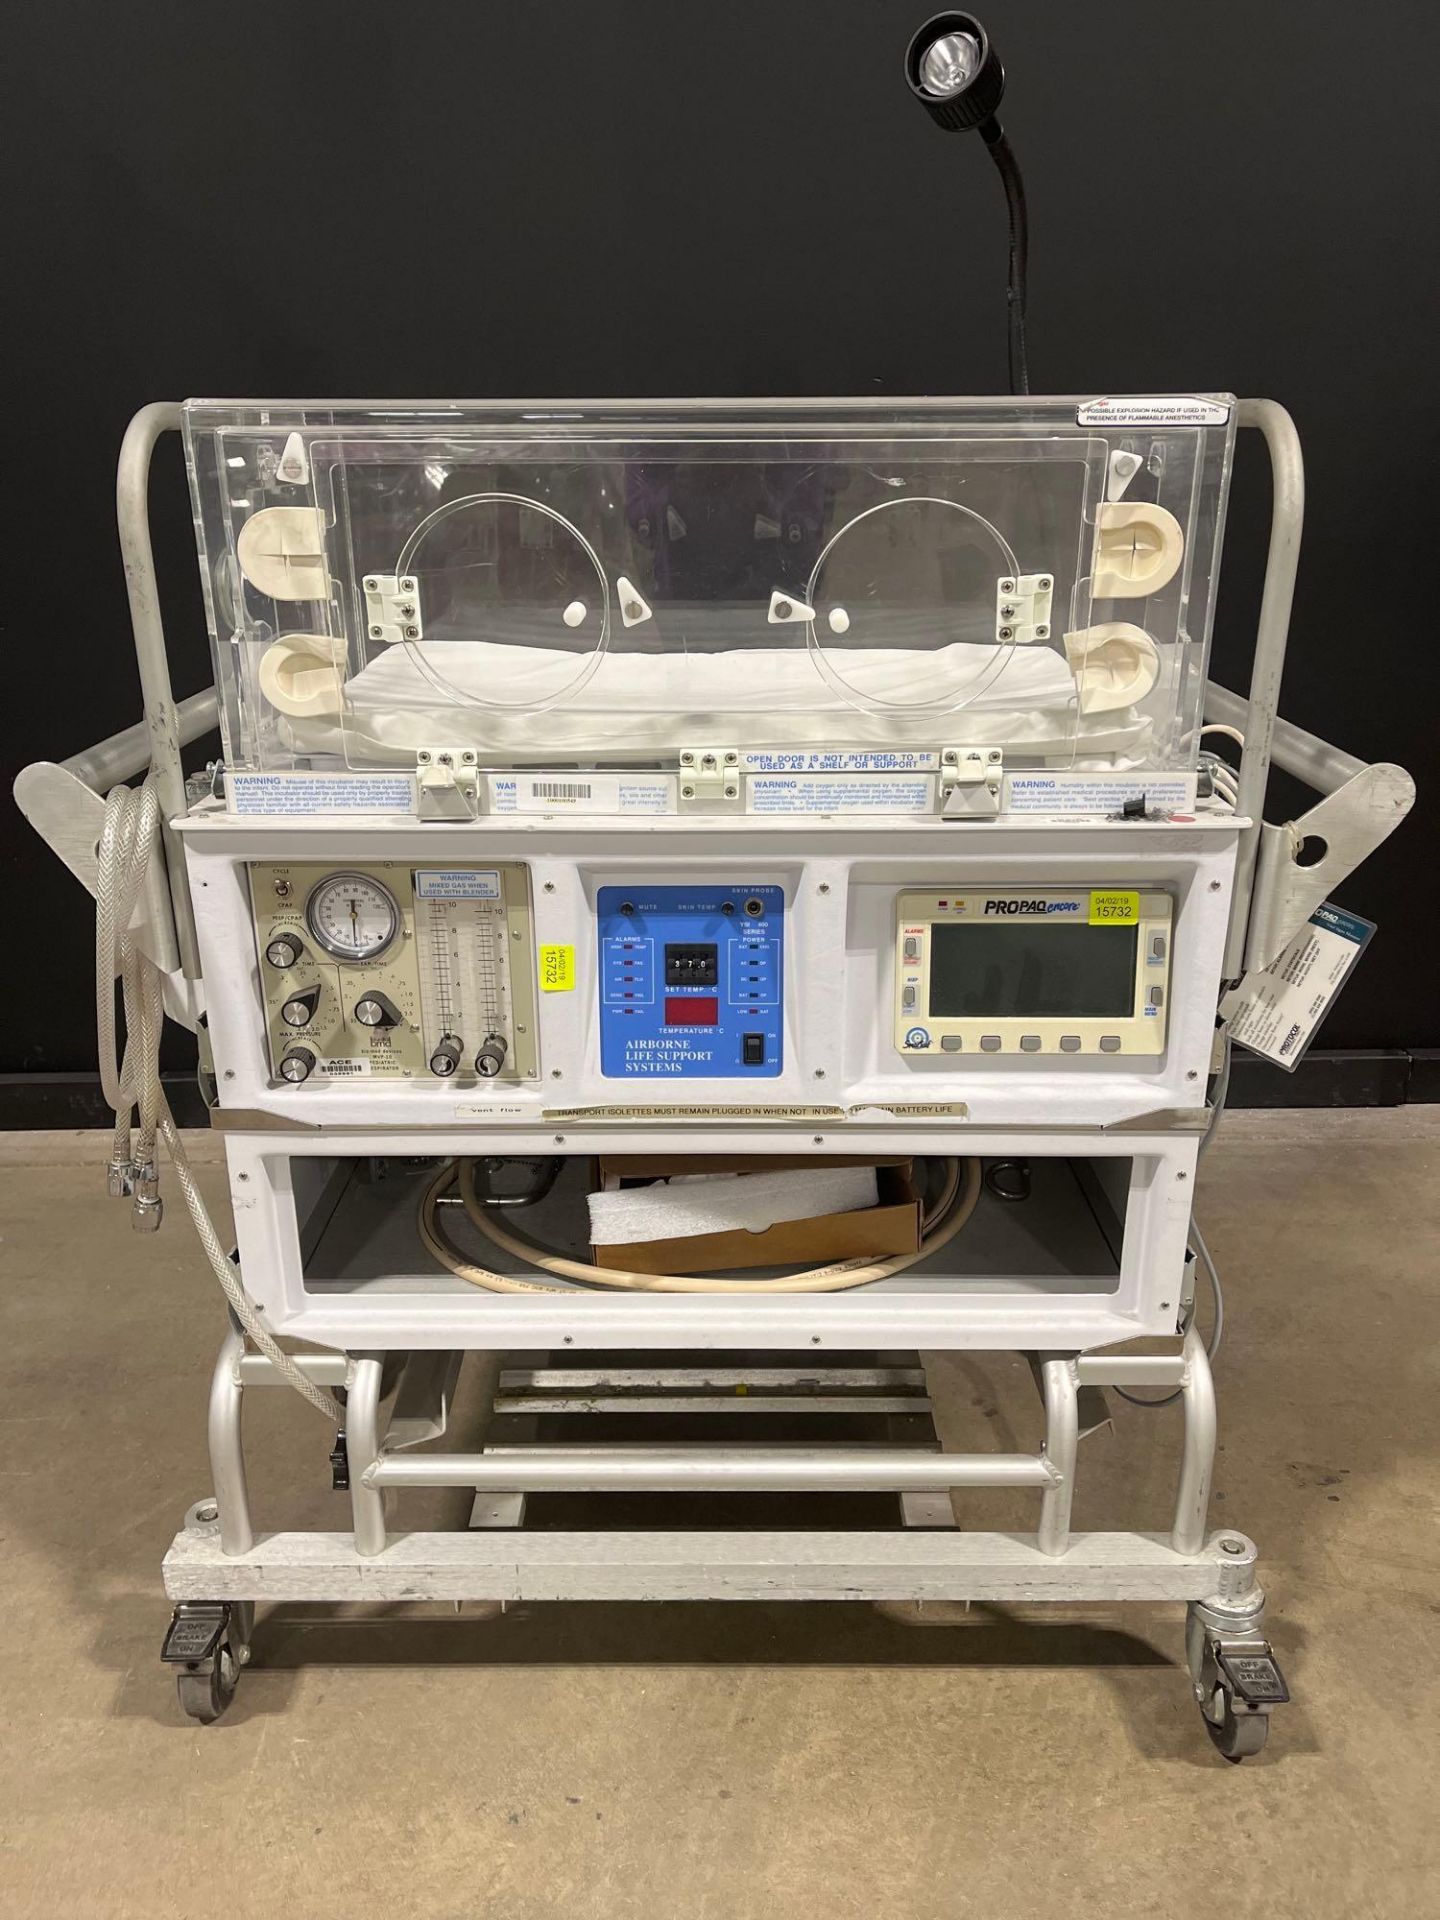 AIRBORNE LIFE SUPPORT SYSTEMS INFANT INCUBATOR